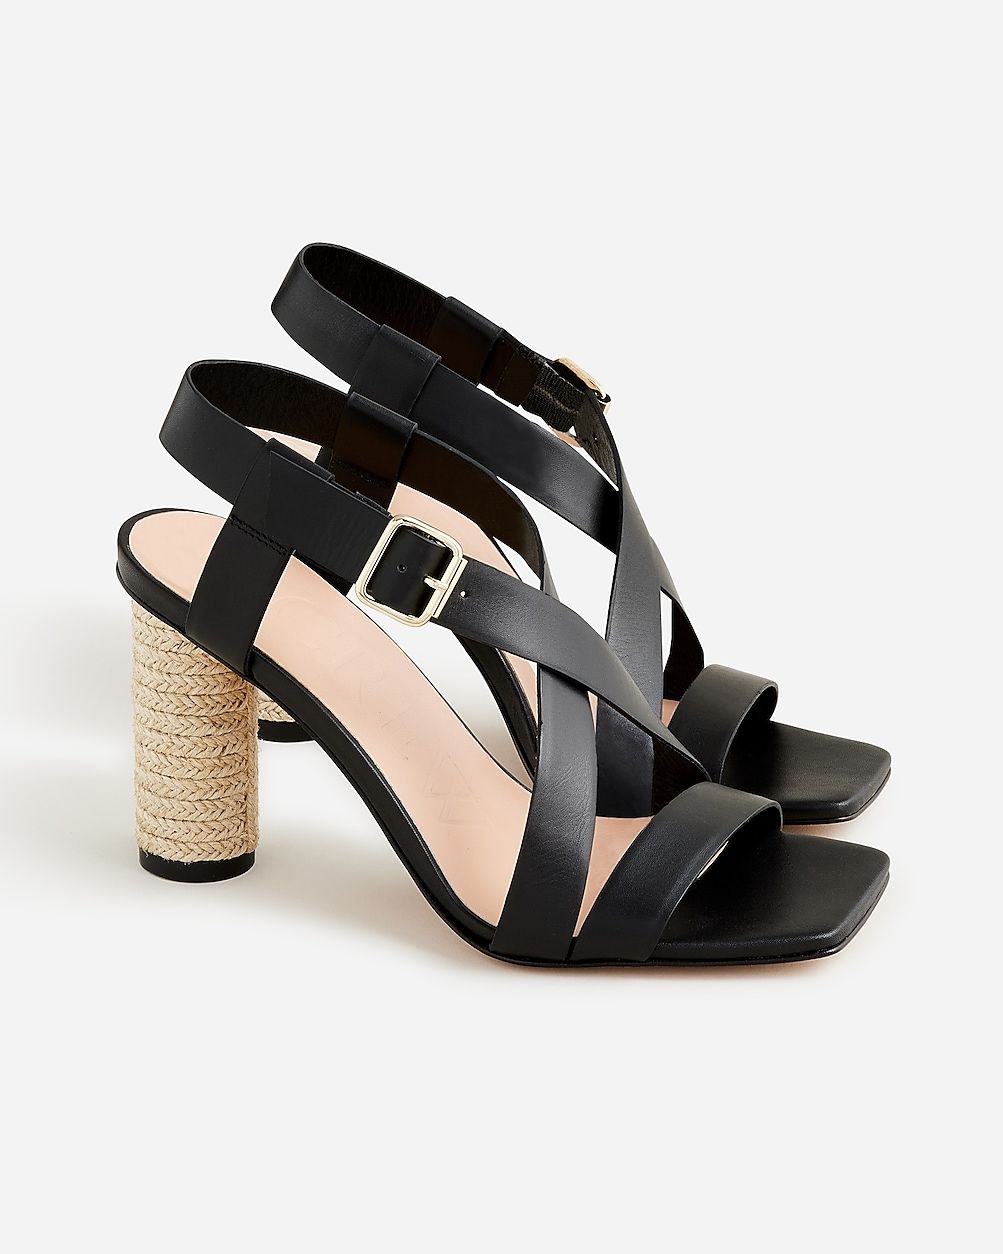 Rounded rope-heel sandals in leather | J.Crew US